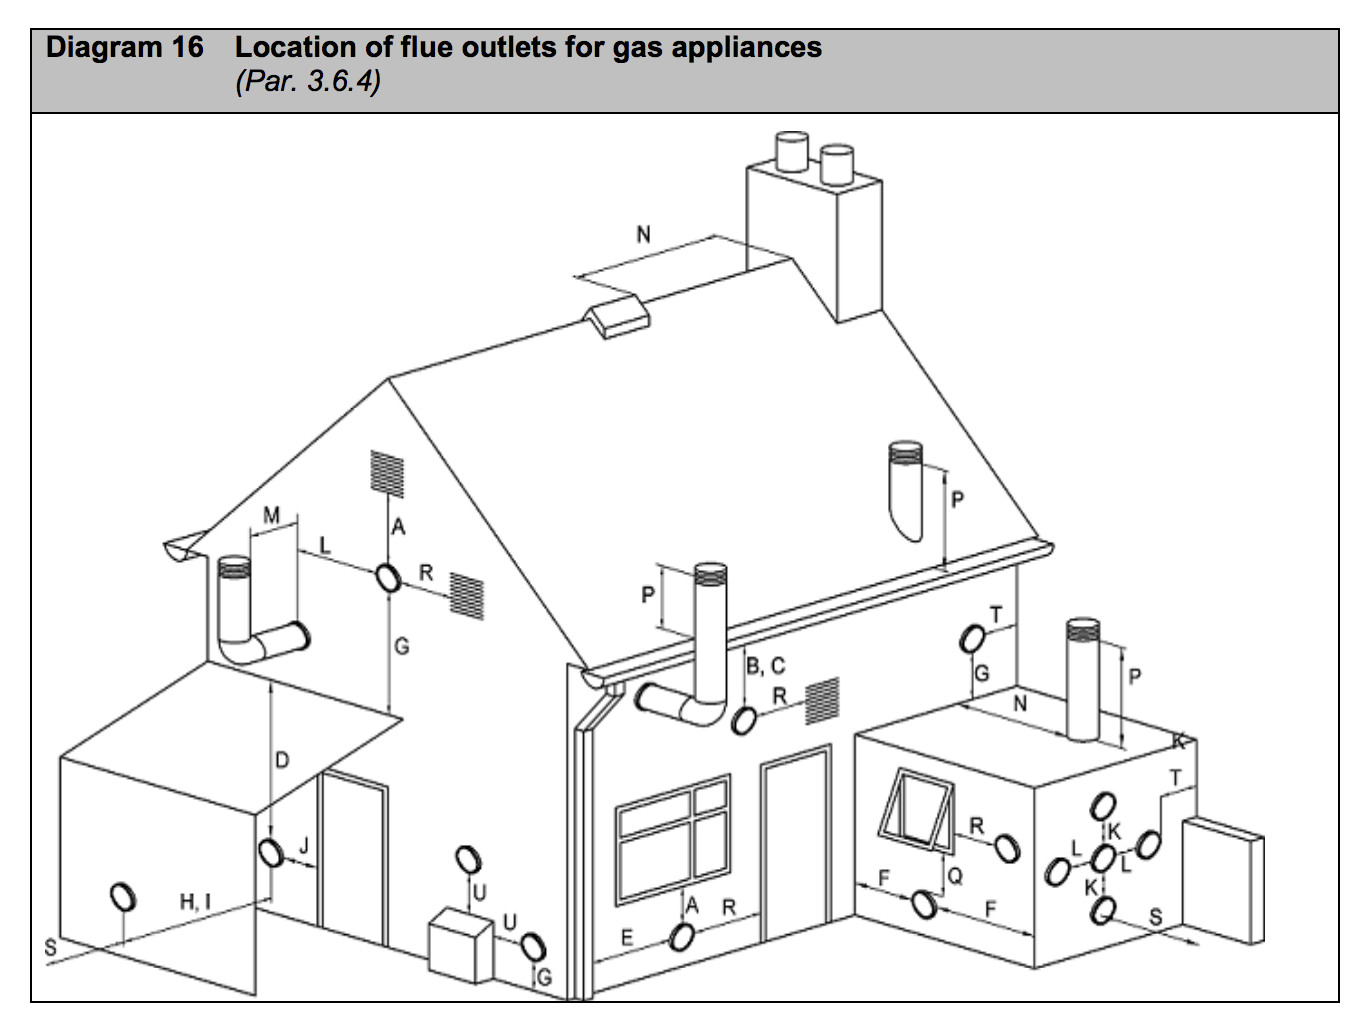 Diagram HJ16 - Location of flue outlets for gas appliances - Extract from TGD J